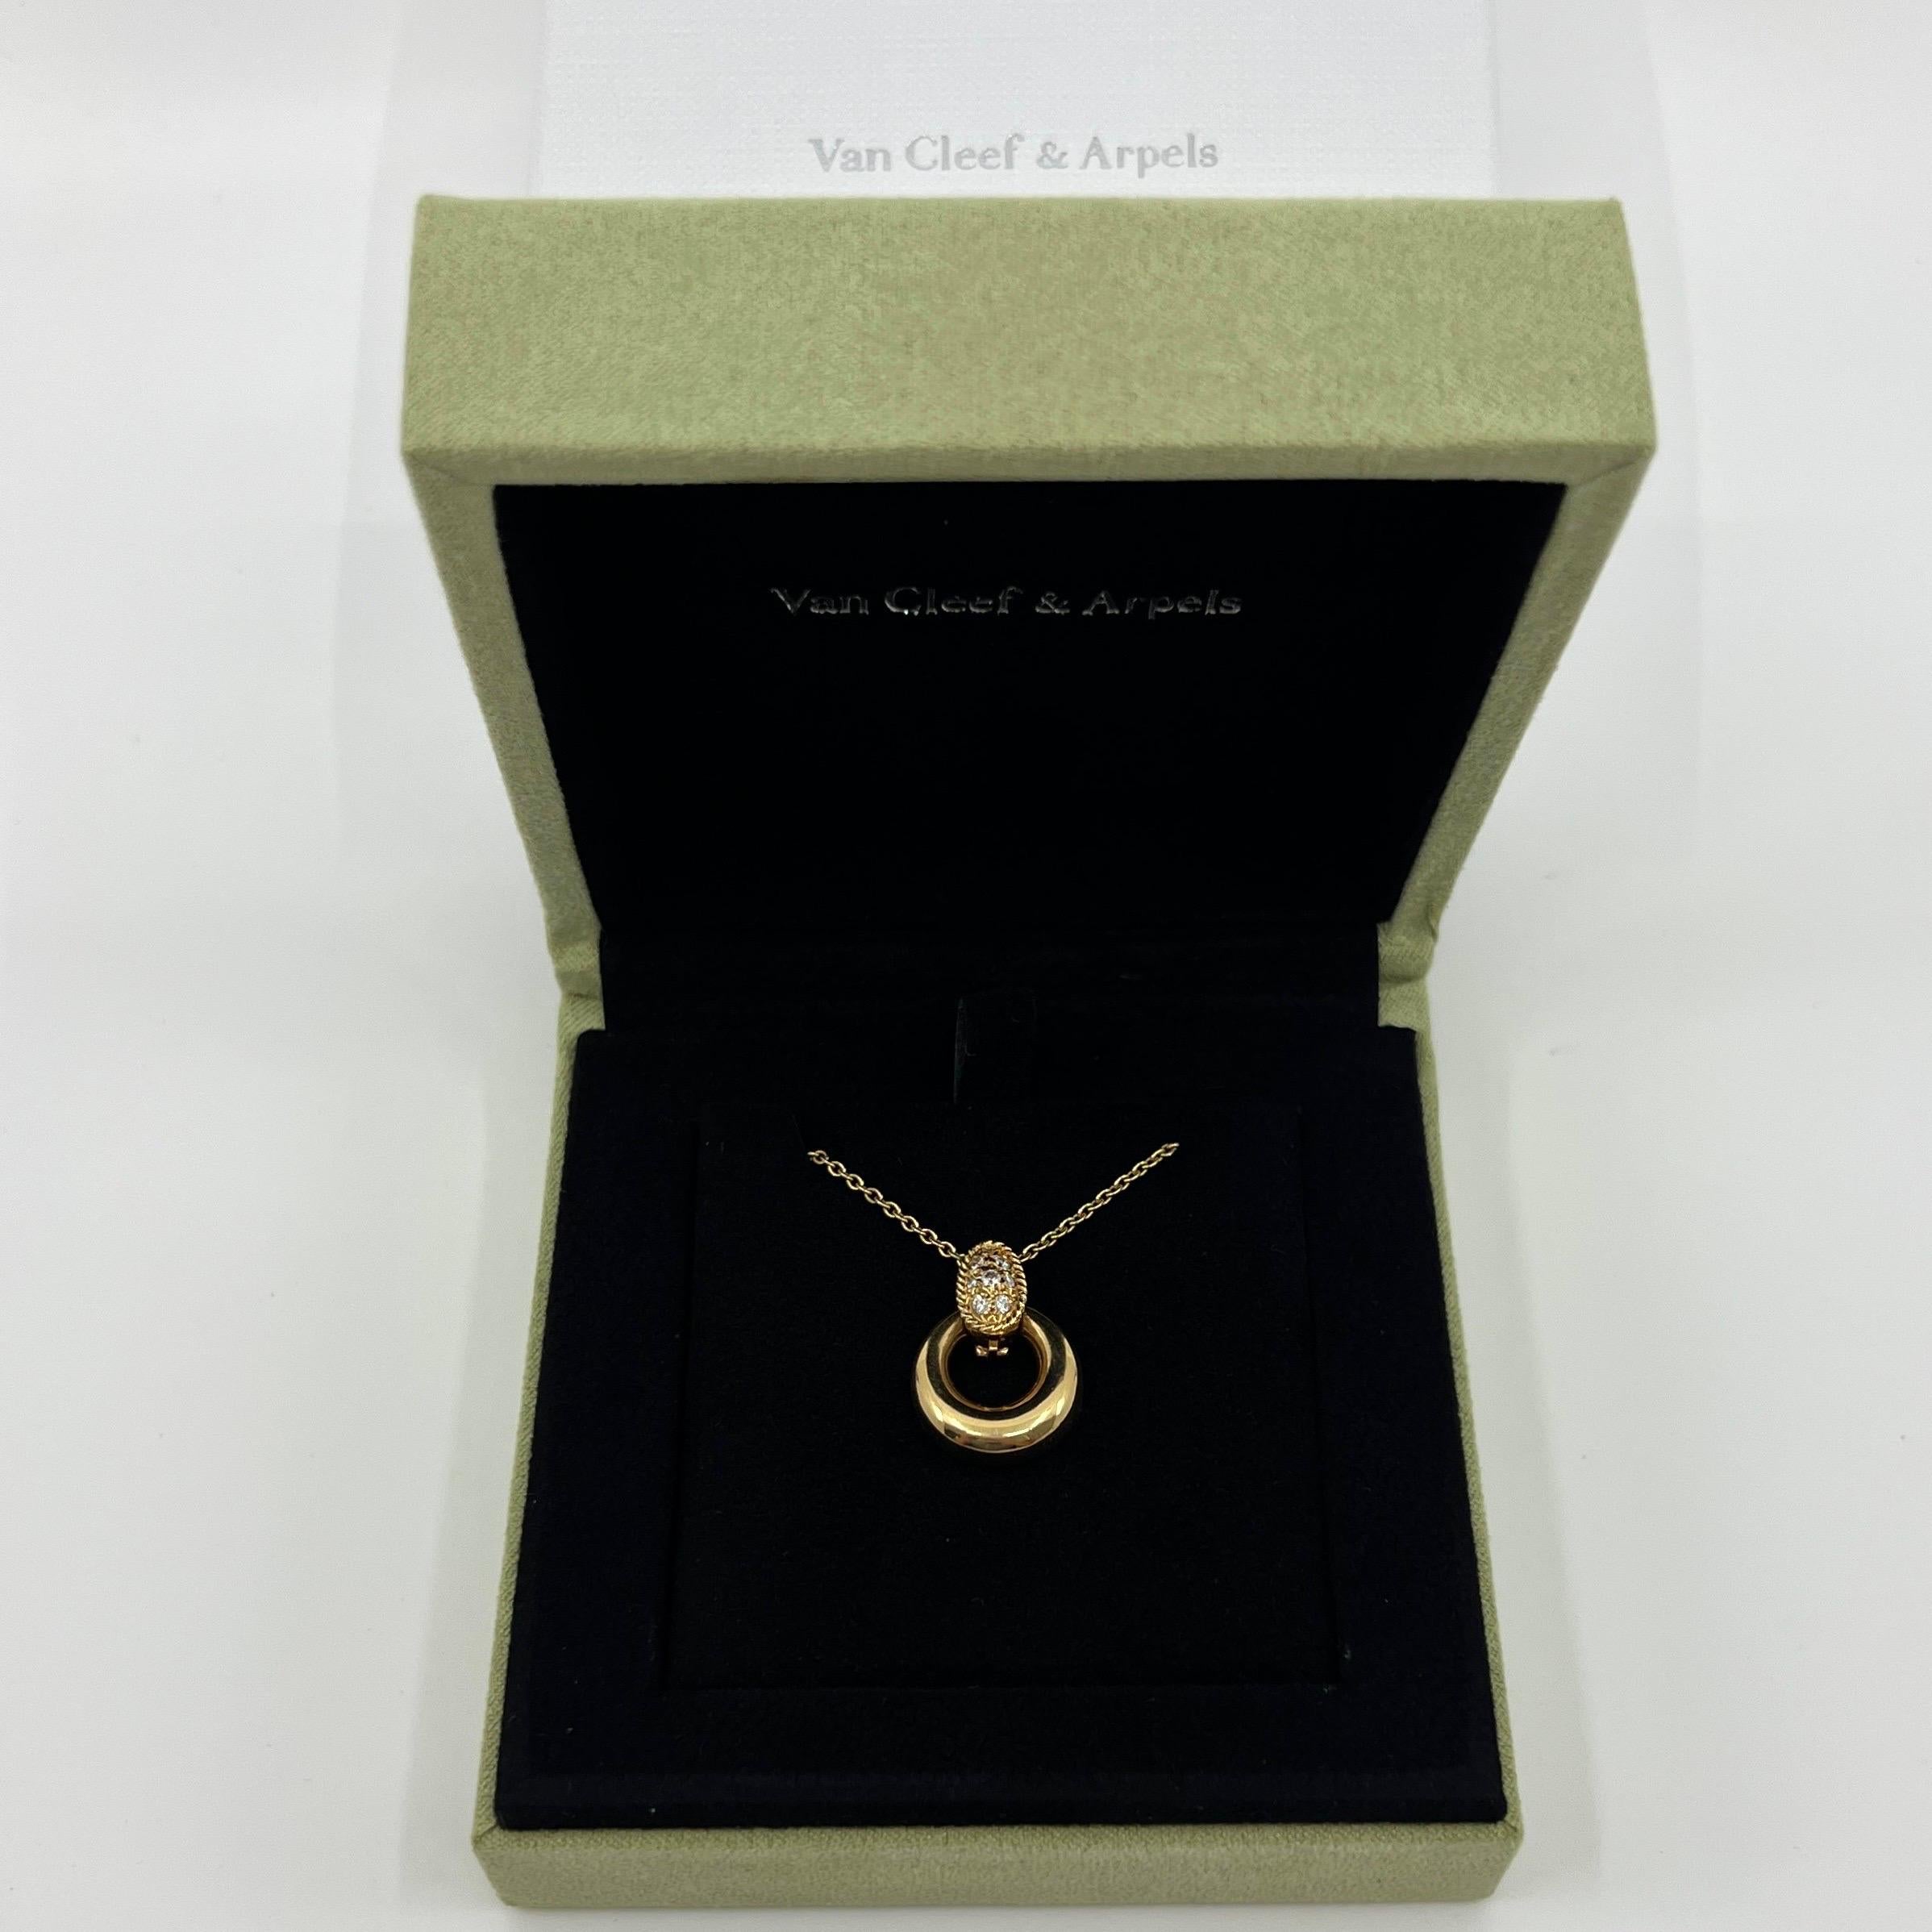 Vintage Van Cleef & Arpels Round Circle Diamond 18k Yellow Gold Pendant Necklace.

A beautiful and classic round circle pendant necklace by Van Cleef & Arpels with a diamond set bail. x8 varying sizes of top quality round brilliant cut